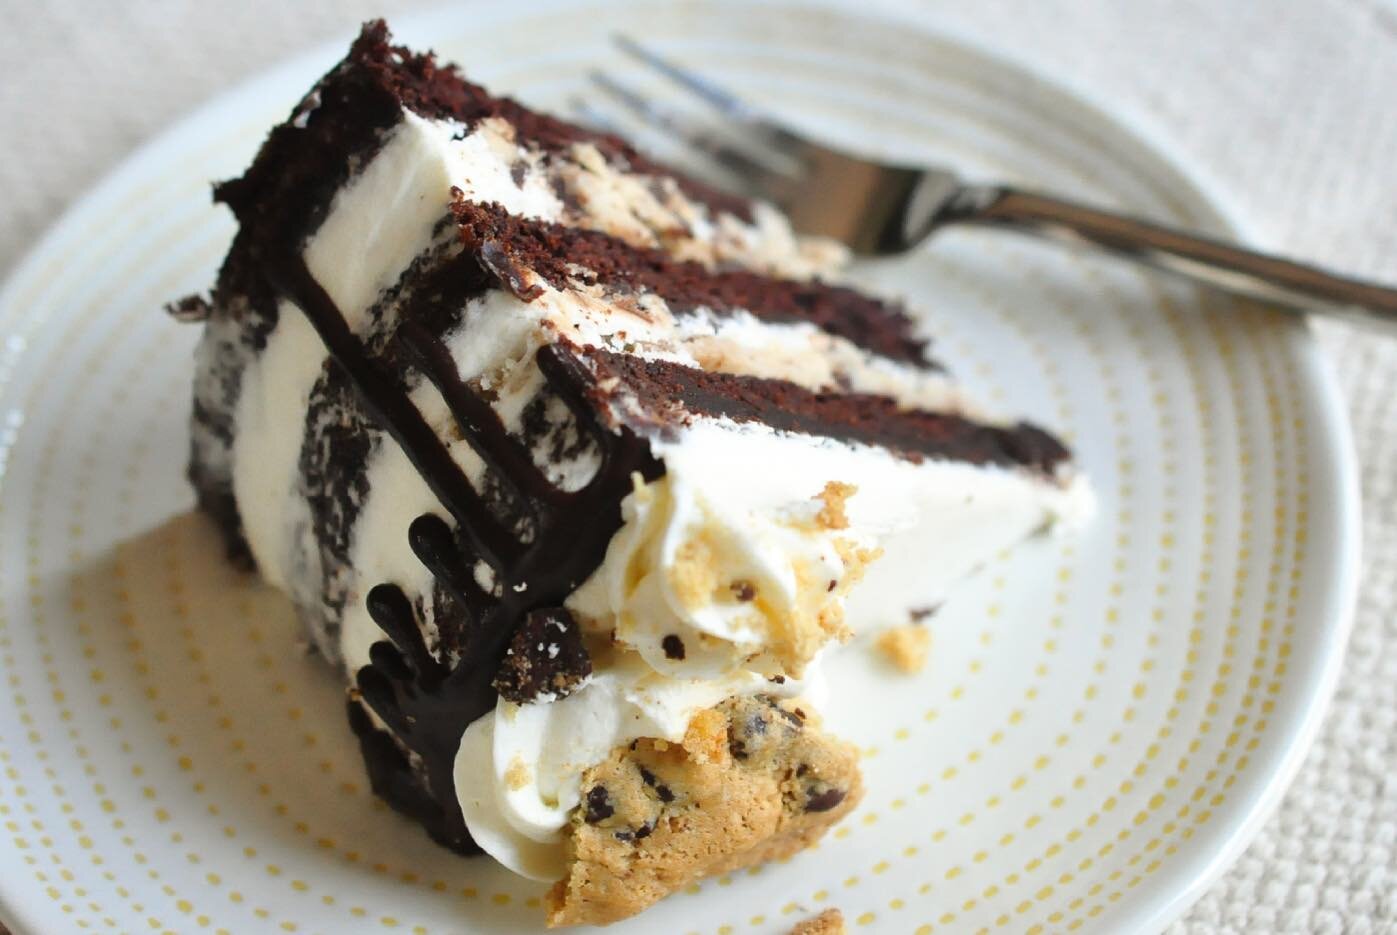 Me: Tell Dad he&rsquo;s your favorite without telling him he&rsquo;s your favorite. 

You: &lt;hands him a slice of Chocolate Chip Cookie Dough Cake with dark chocolate cake layers, chocolate chip cookie dough between those layers, scraped with vanil